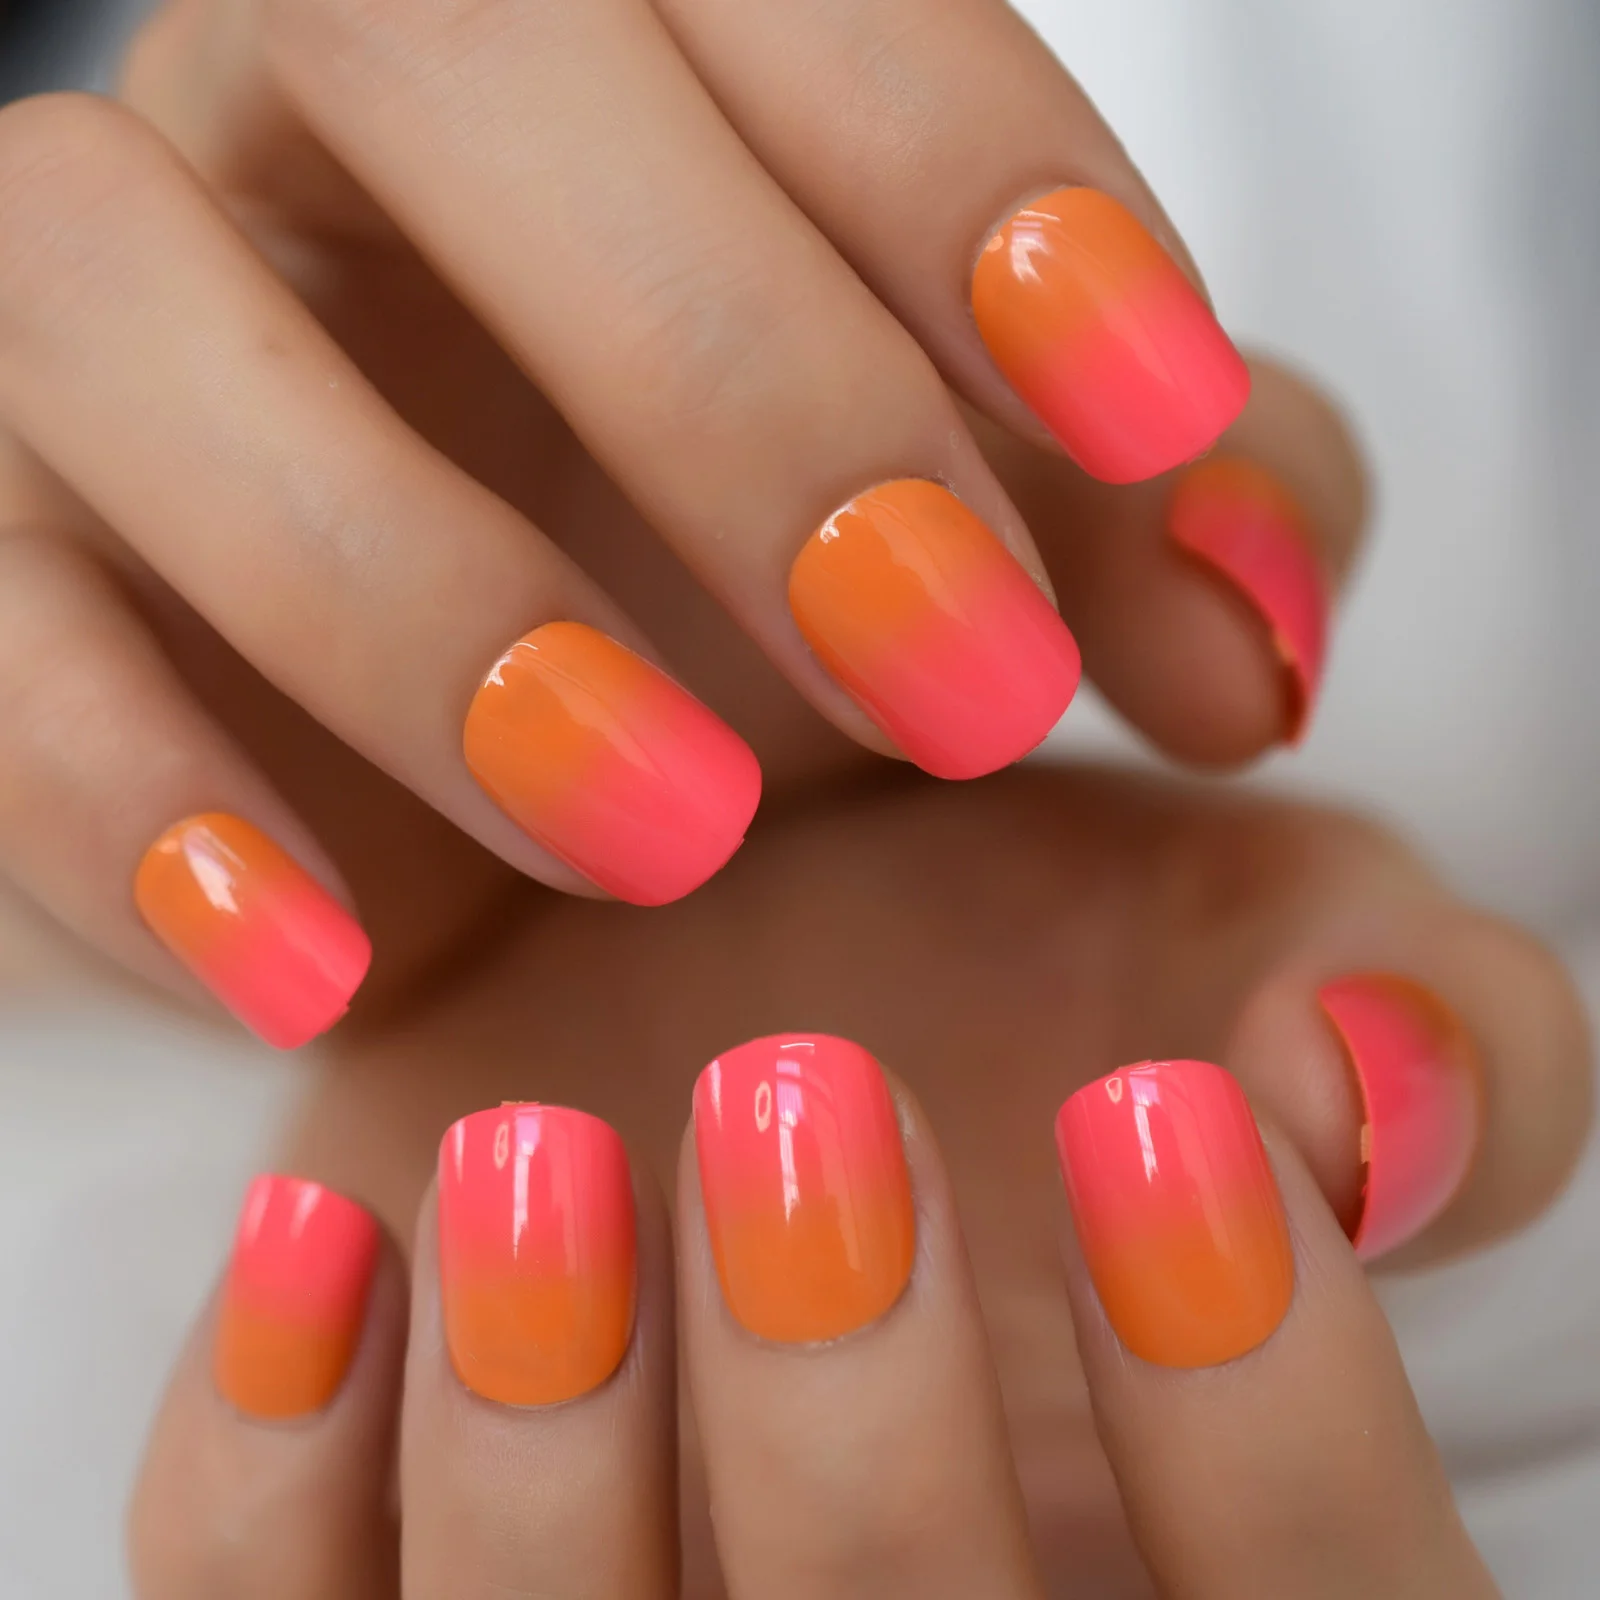 Ombre Fake Press On Nails Short French Manicure Set Orange Red Bright Cute Artificial Nails For Student Office Women